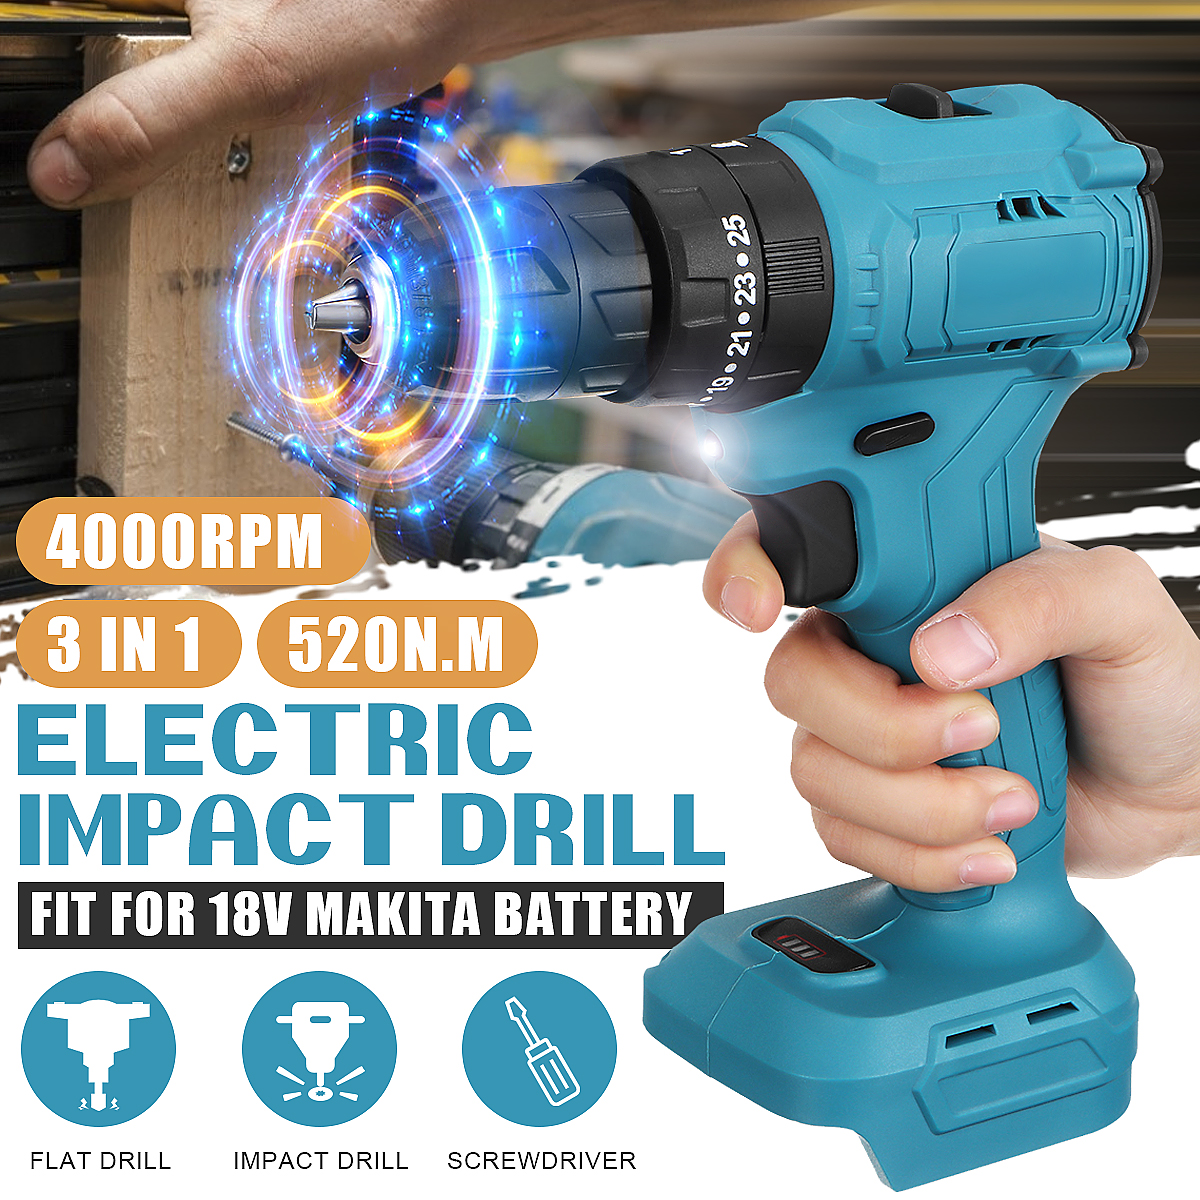 520Nm-Brushless-Cordless-38-Electric-Impact-Drill-Driver-Replacement-for-Makita-18V-Battery-1733295-2